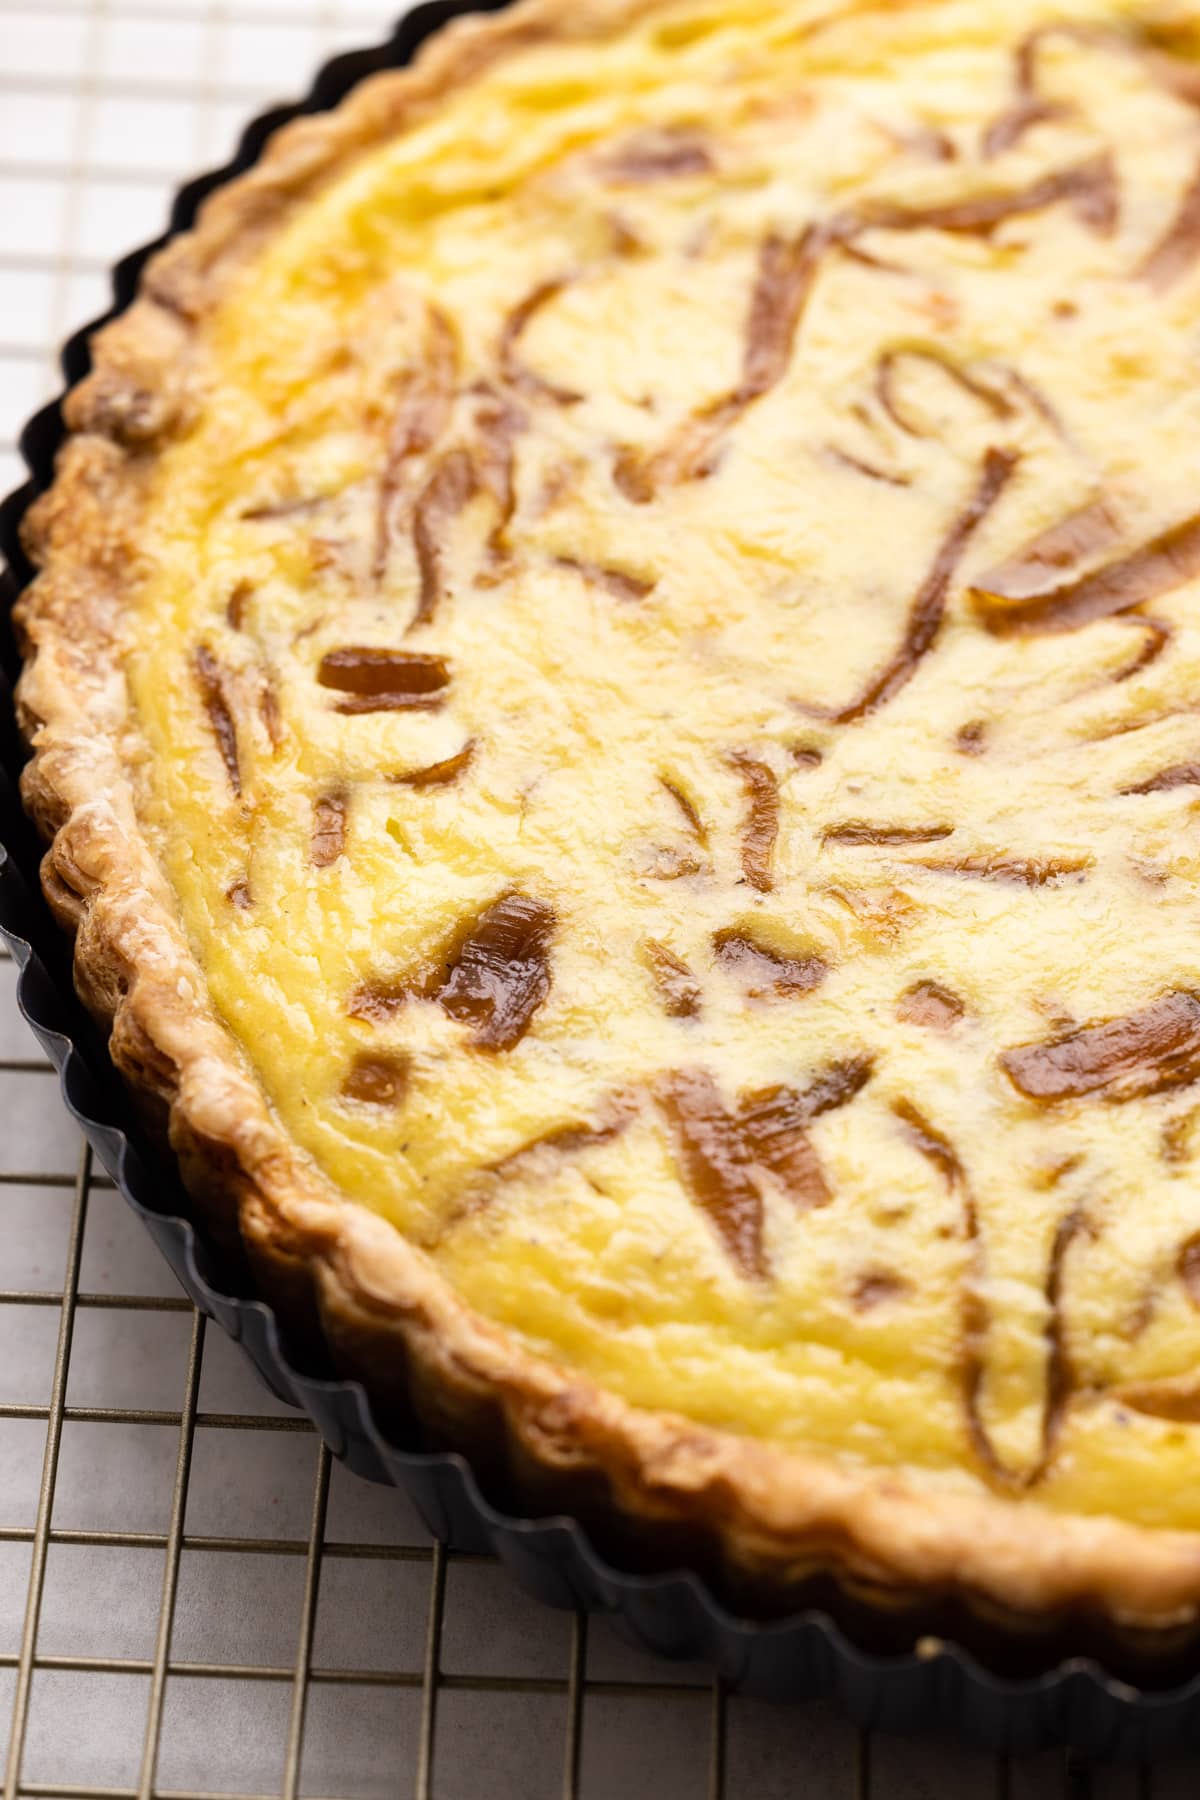 A fully baked and puff caramelized onion quiche.